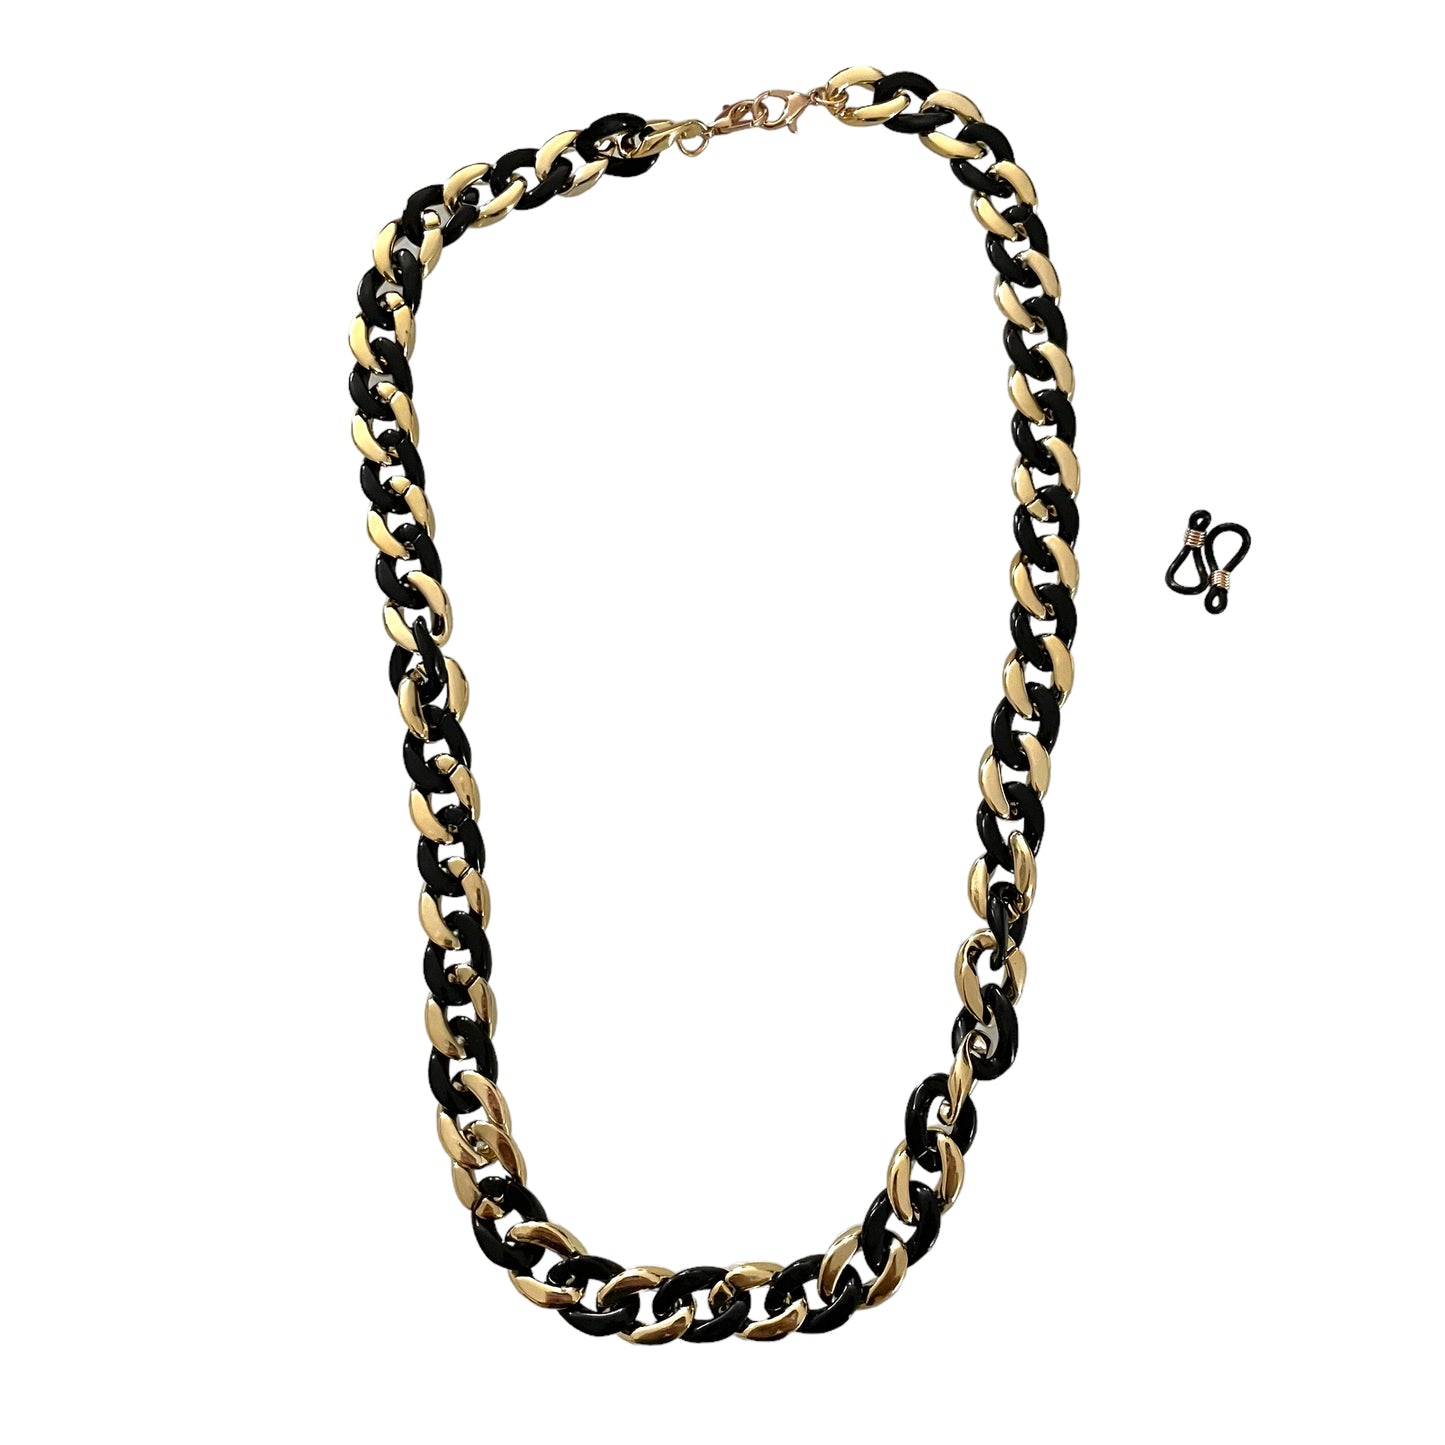 Layla Recycled Plastic Sunglasses Chain And Necklace- 2 in 1 - Black And Gold